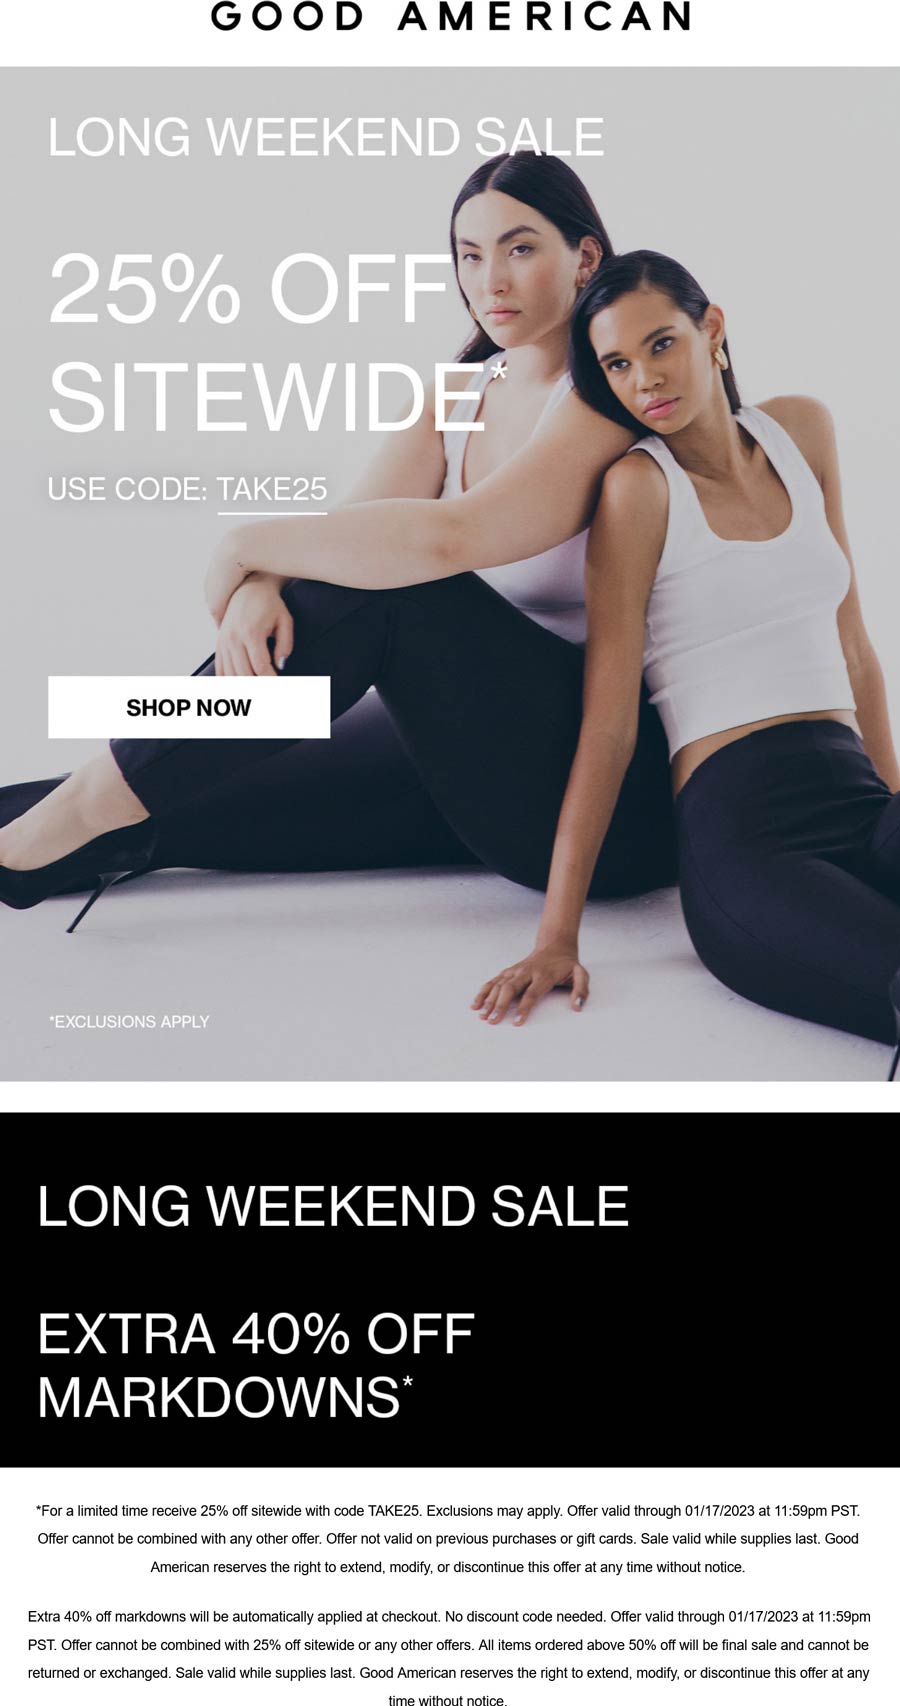 Good American stores Coupon  25-40% off everything at Good American via promo code TAKE25 #goodamerican 